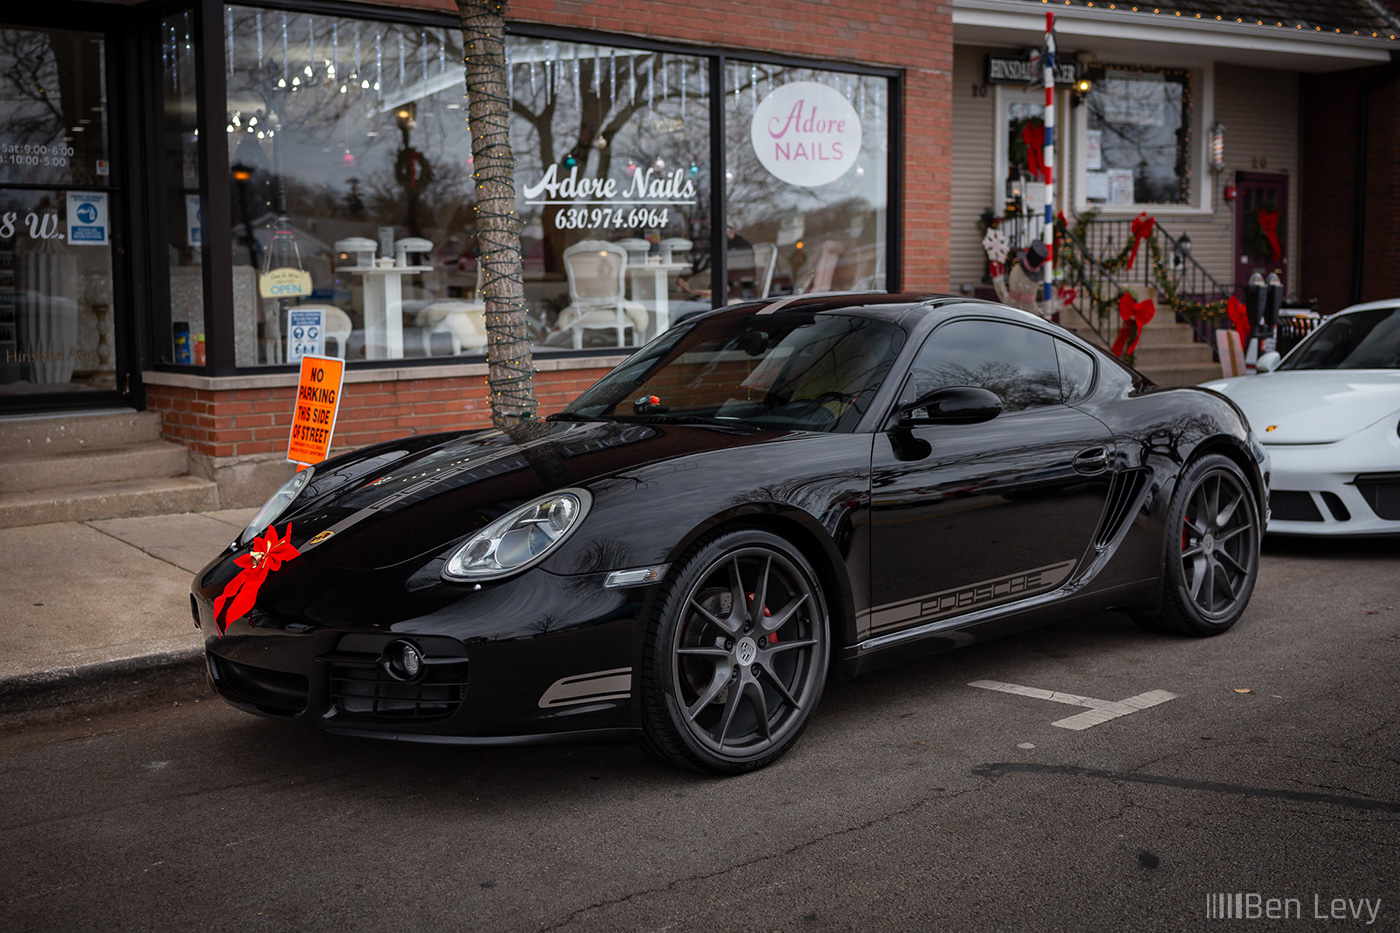 Black Porsche Cayman in Hinsdale for Toy Drive